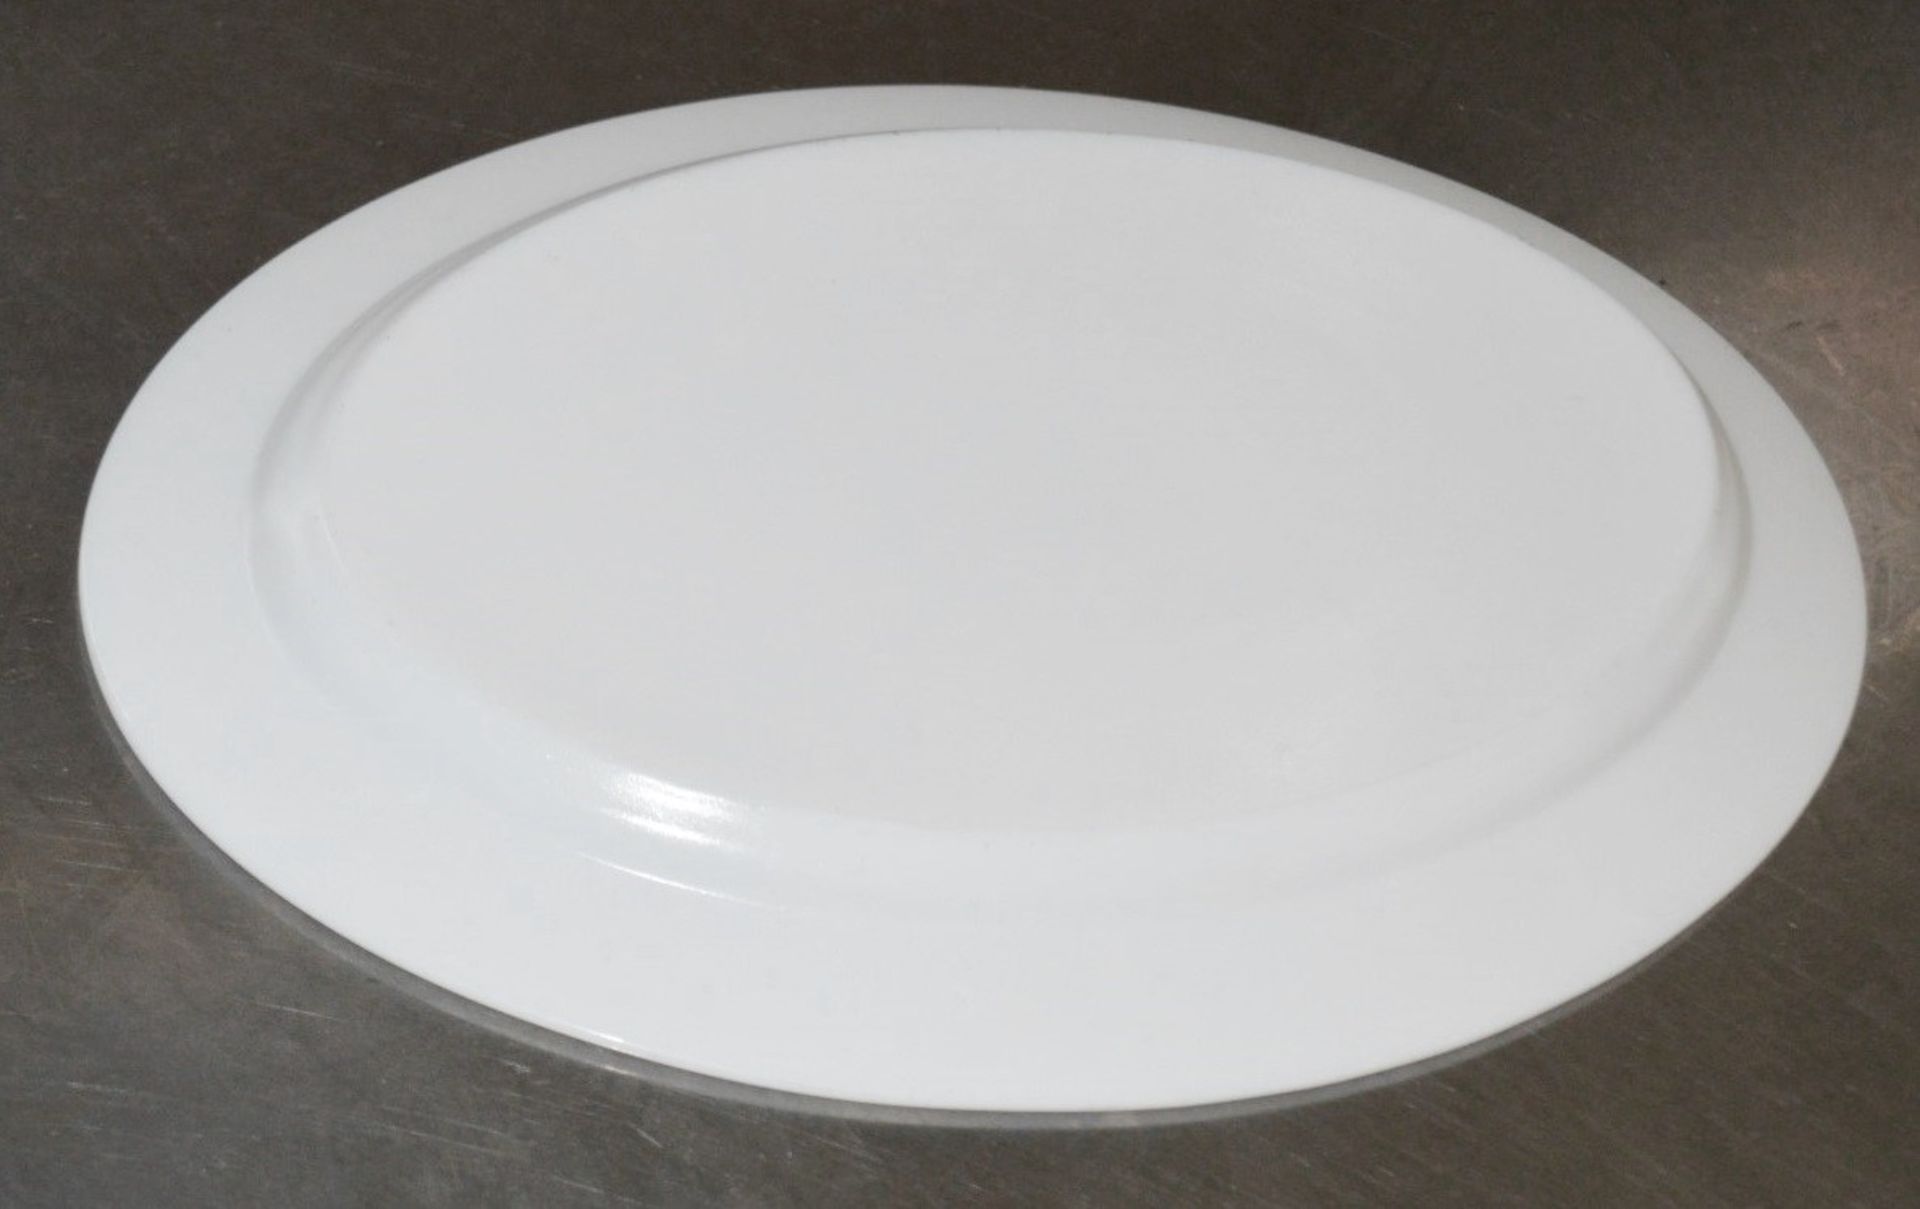 50 x Commercial Oval Dining Platter Plates - Dimensions: 31 x 23cm - Pre-owned, From A London - Image 4 of 4